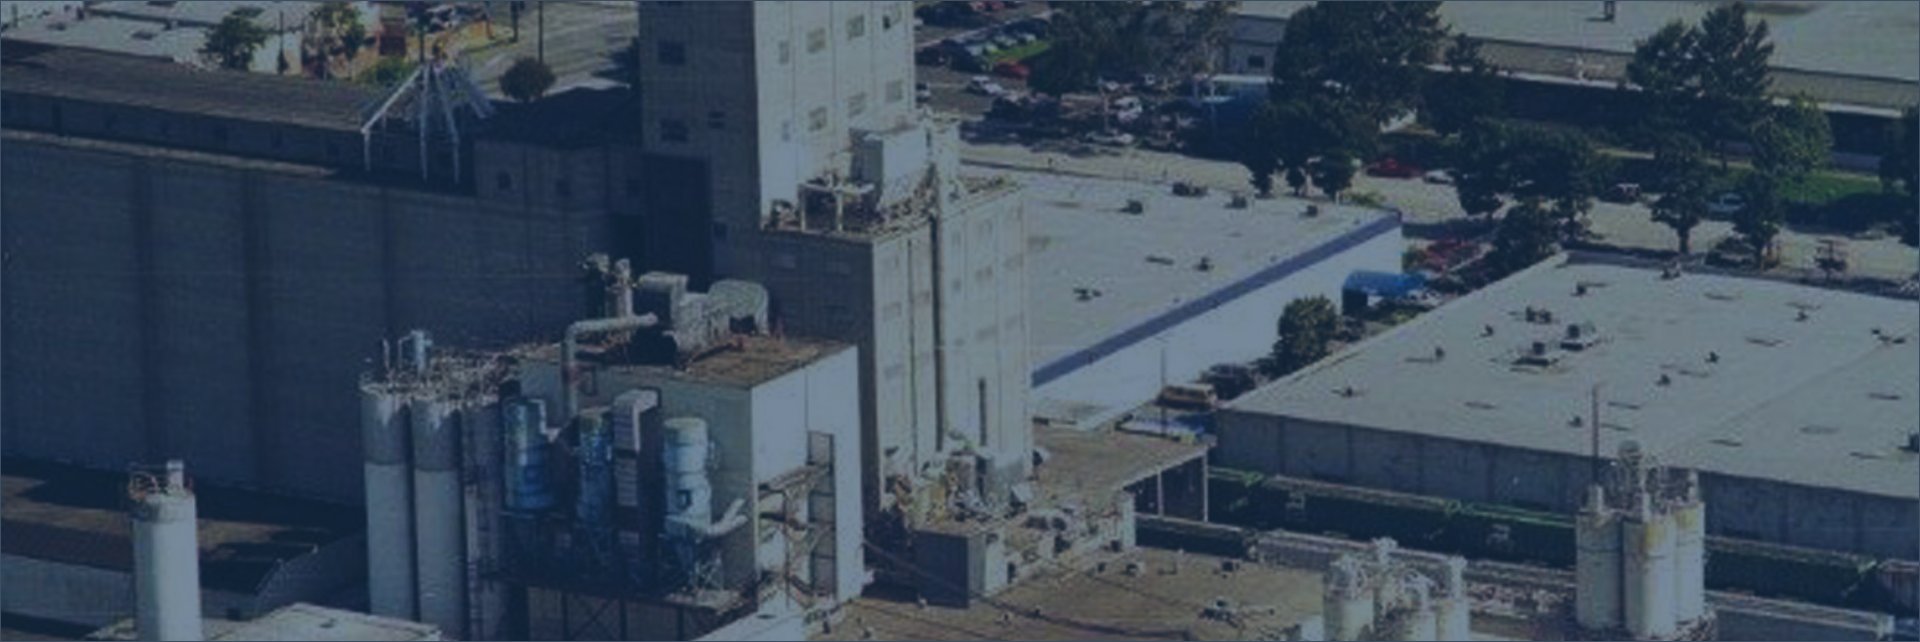 Miller Milling Announces Expansion of Los Angeles Facility